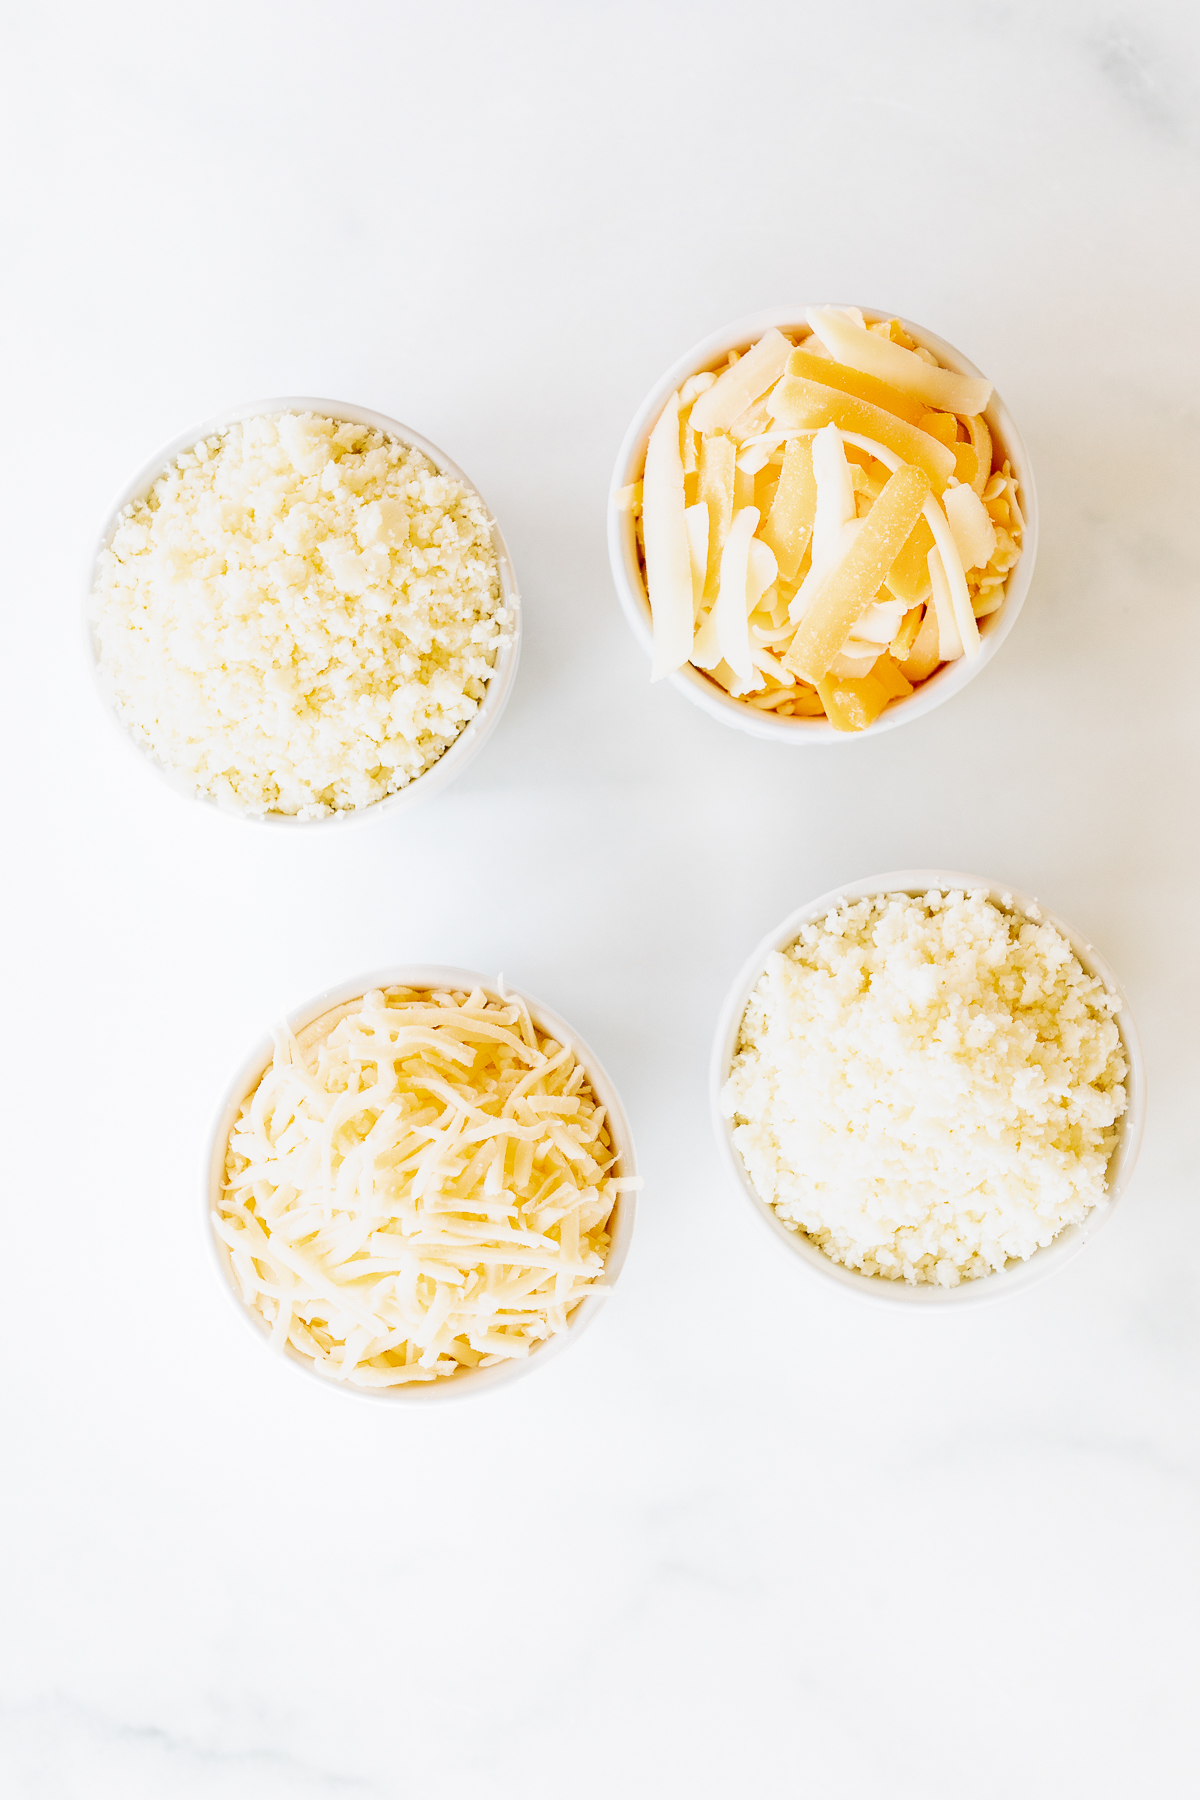 Four bowls of Mexican cheese varieties in white bowls on a marble surface.